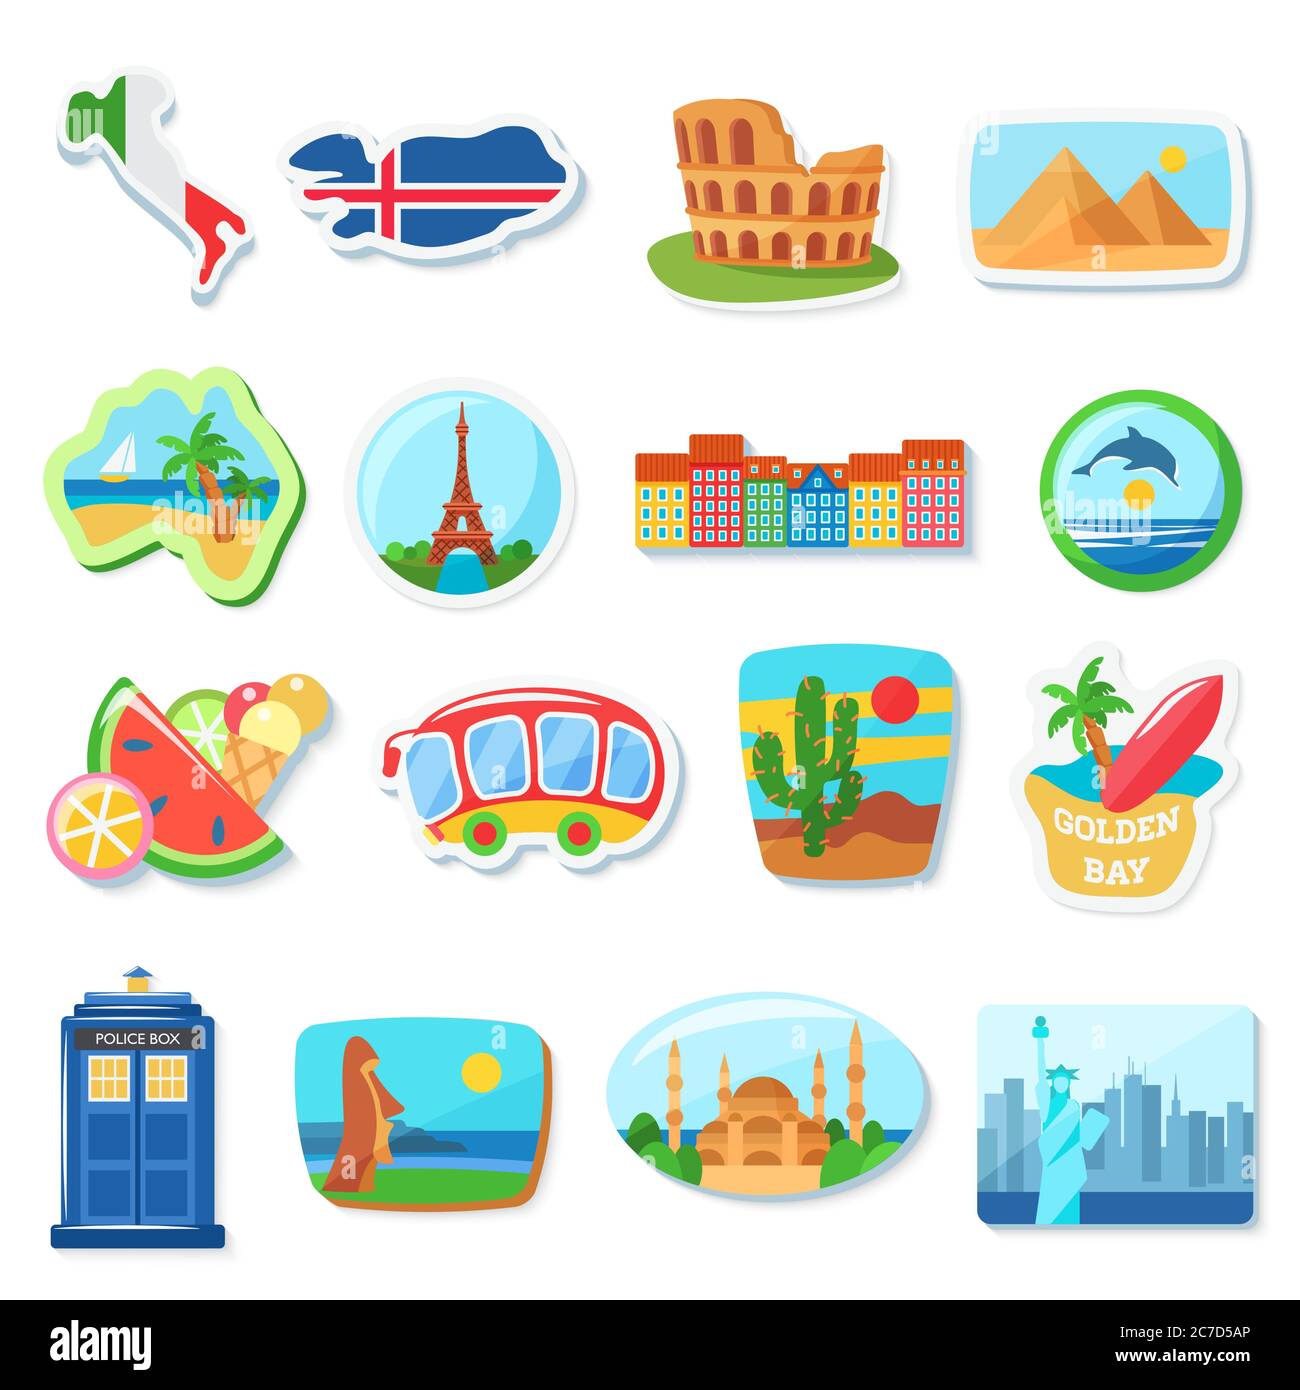 Fridge magnets flat vector illustration. Abroad, foreign countries traveling souvenirs. Famous European landmarks and tourist attractions stickers vector cartoon illustration set Stock Vector